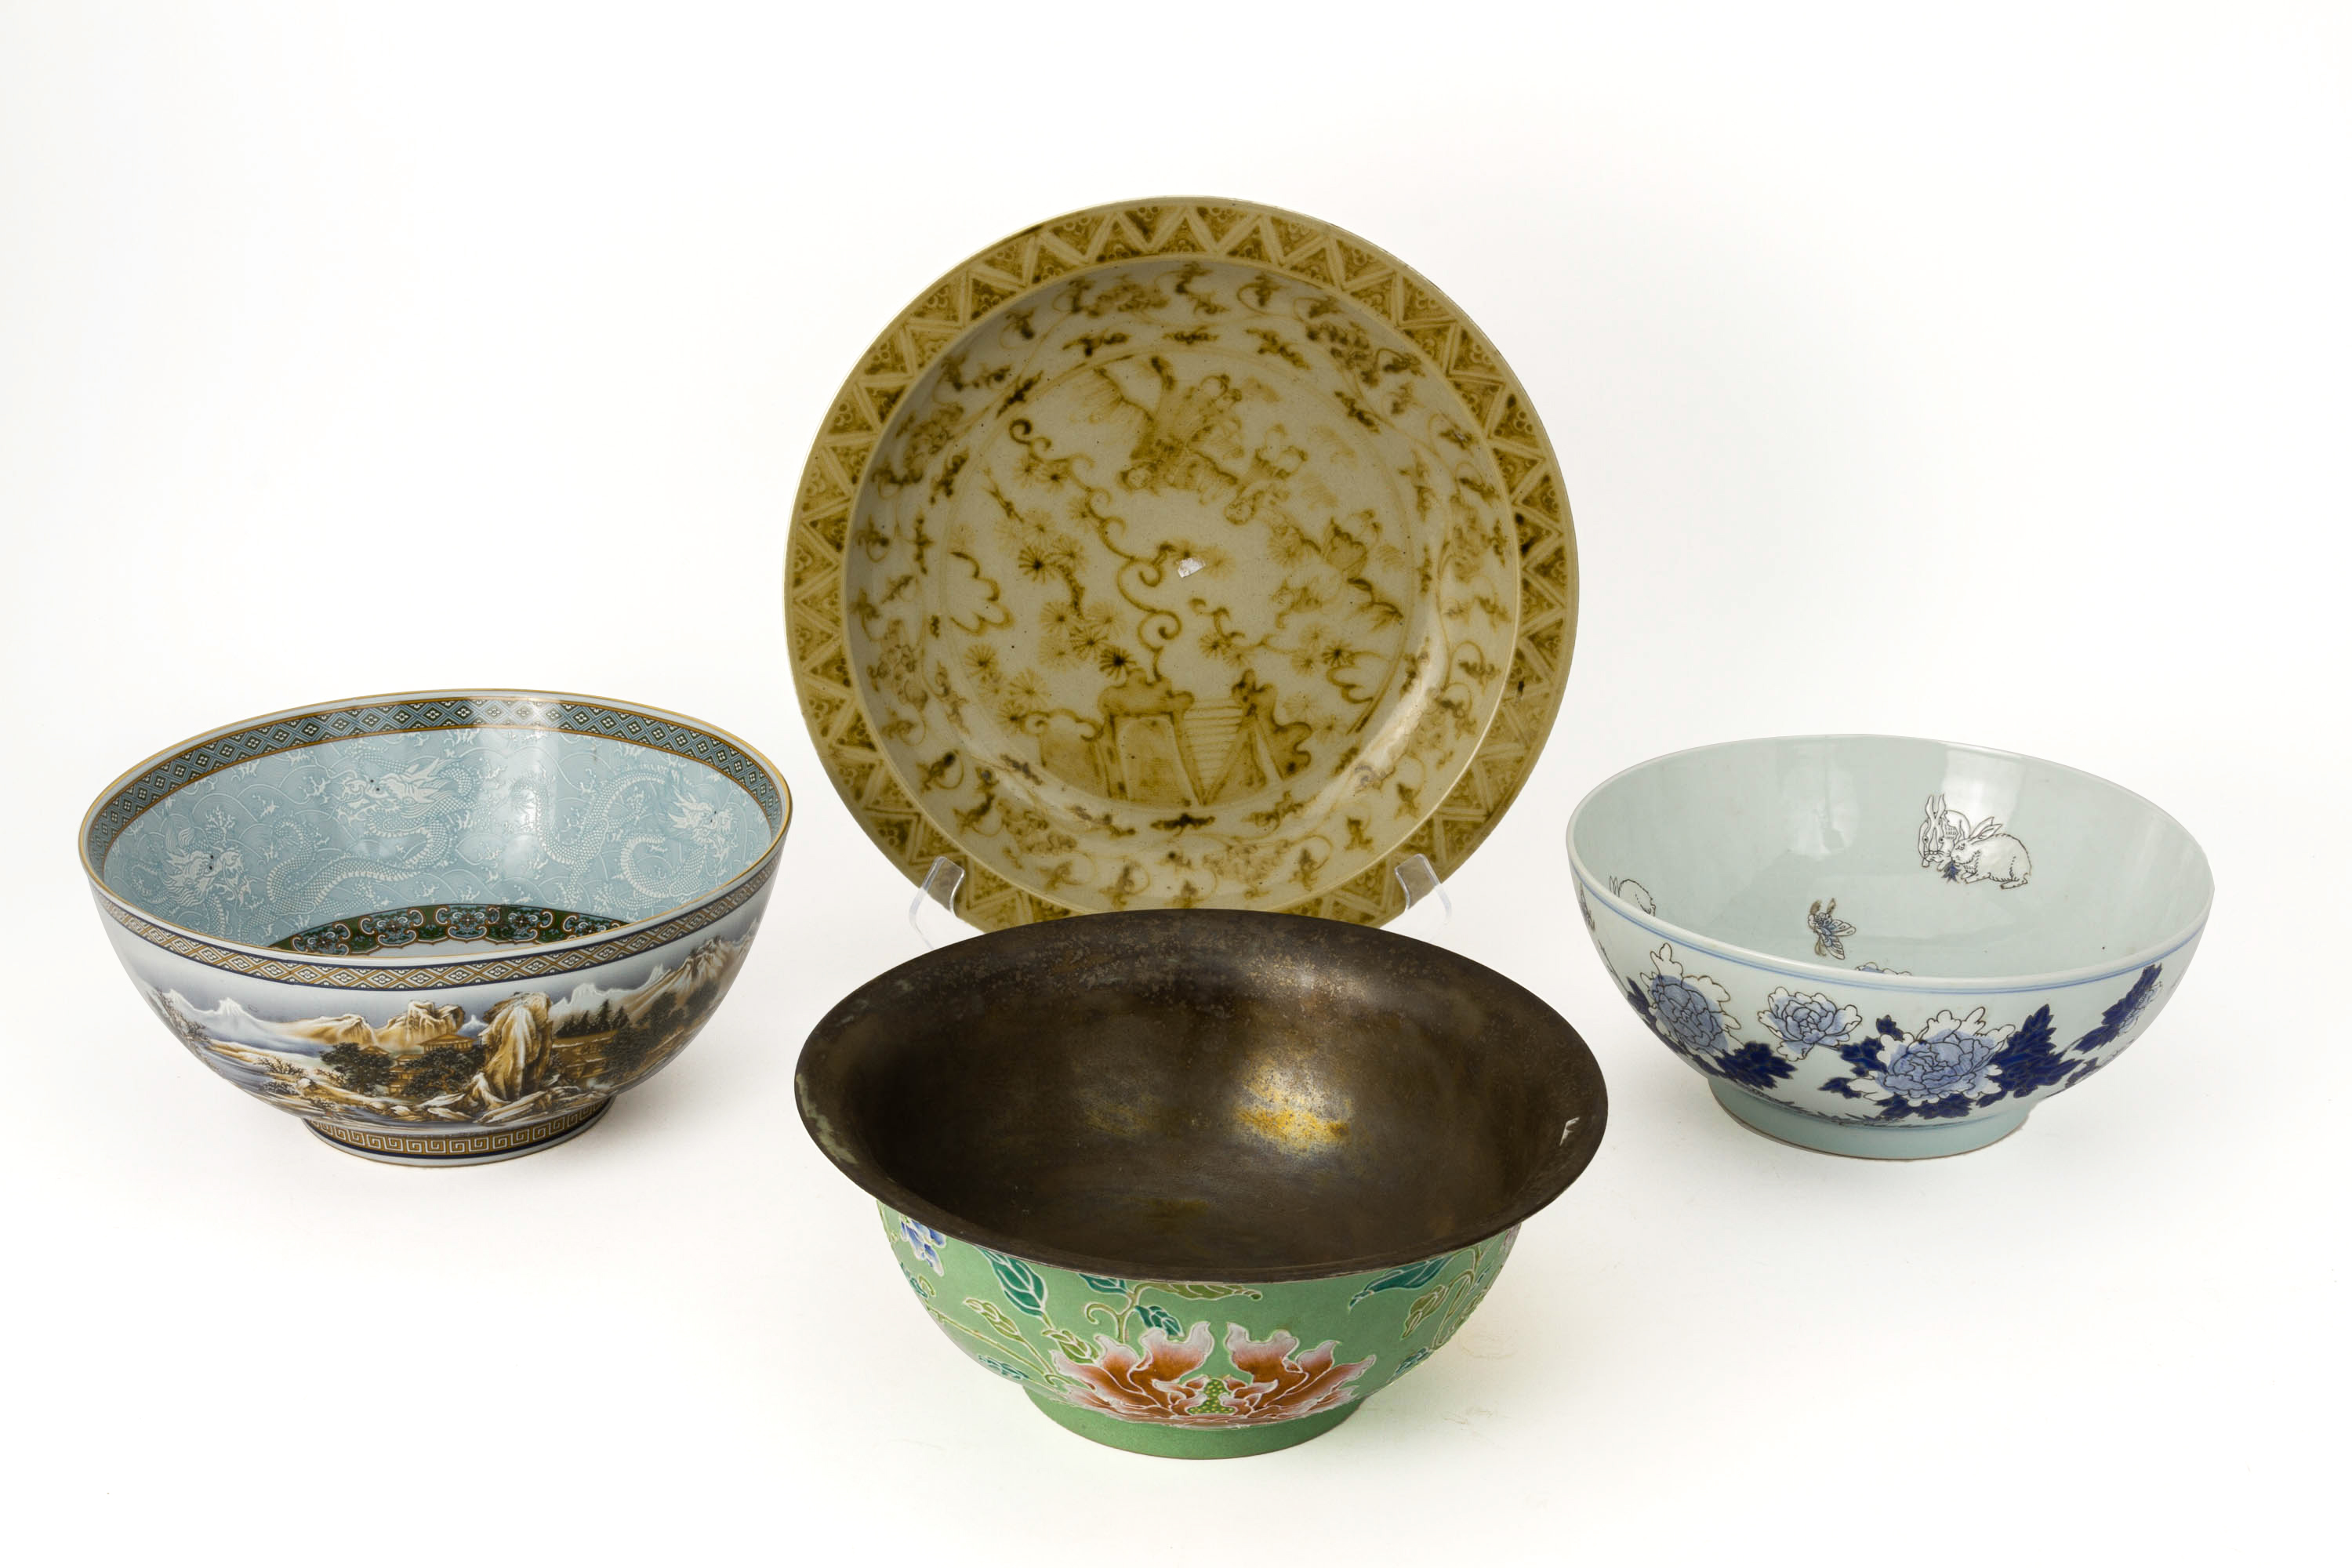 THREE LARGE PORCELAIN BOWLS AND A DISH